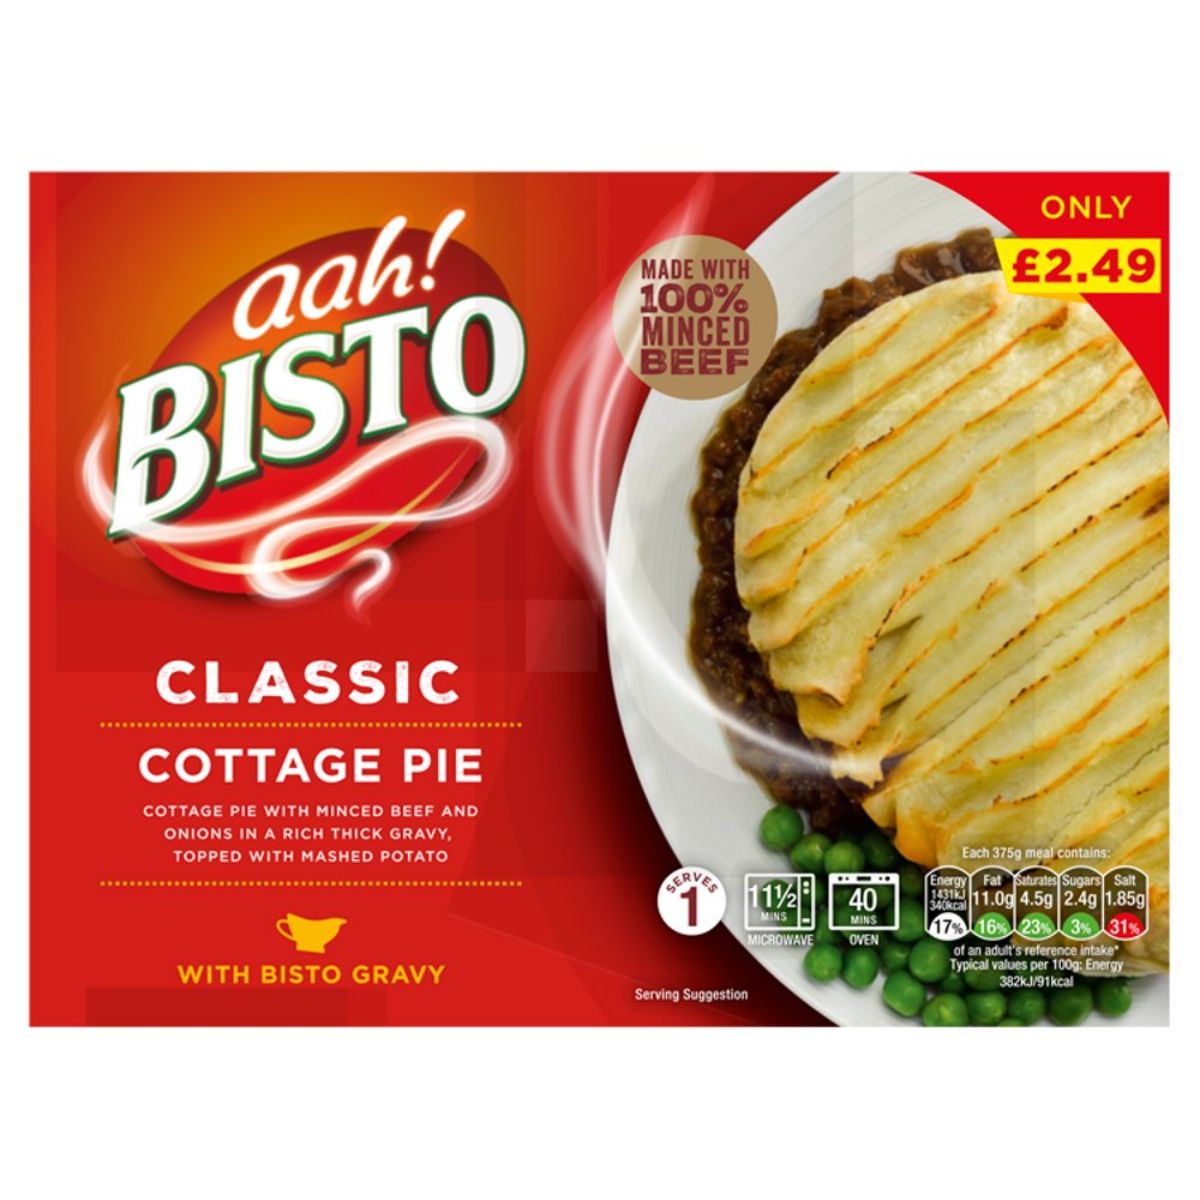 A package of Bisto - Classic Cottage Pie - 375g.